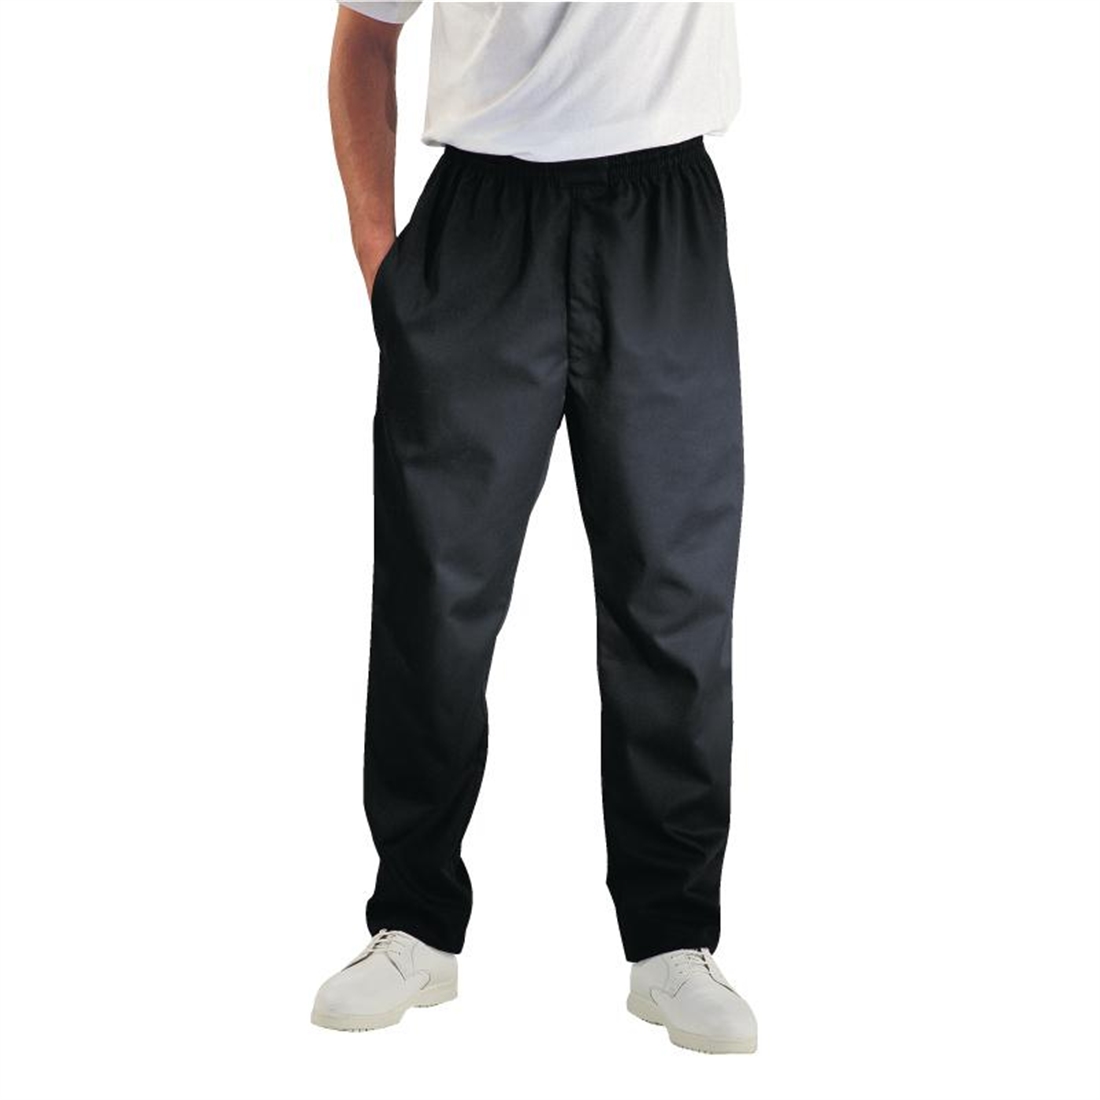 Chef Works Unisex Easyfit Chefs Trousers Black S